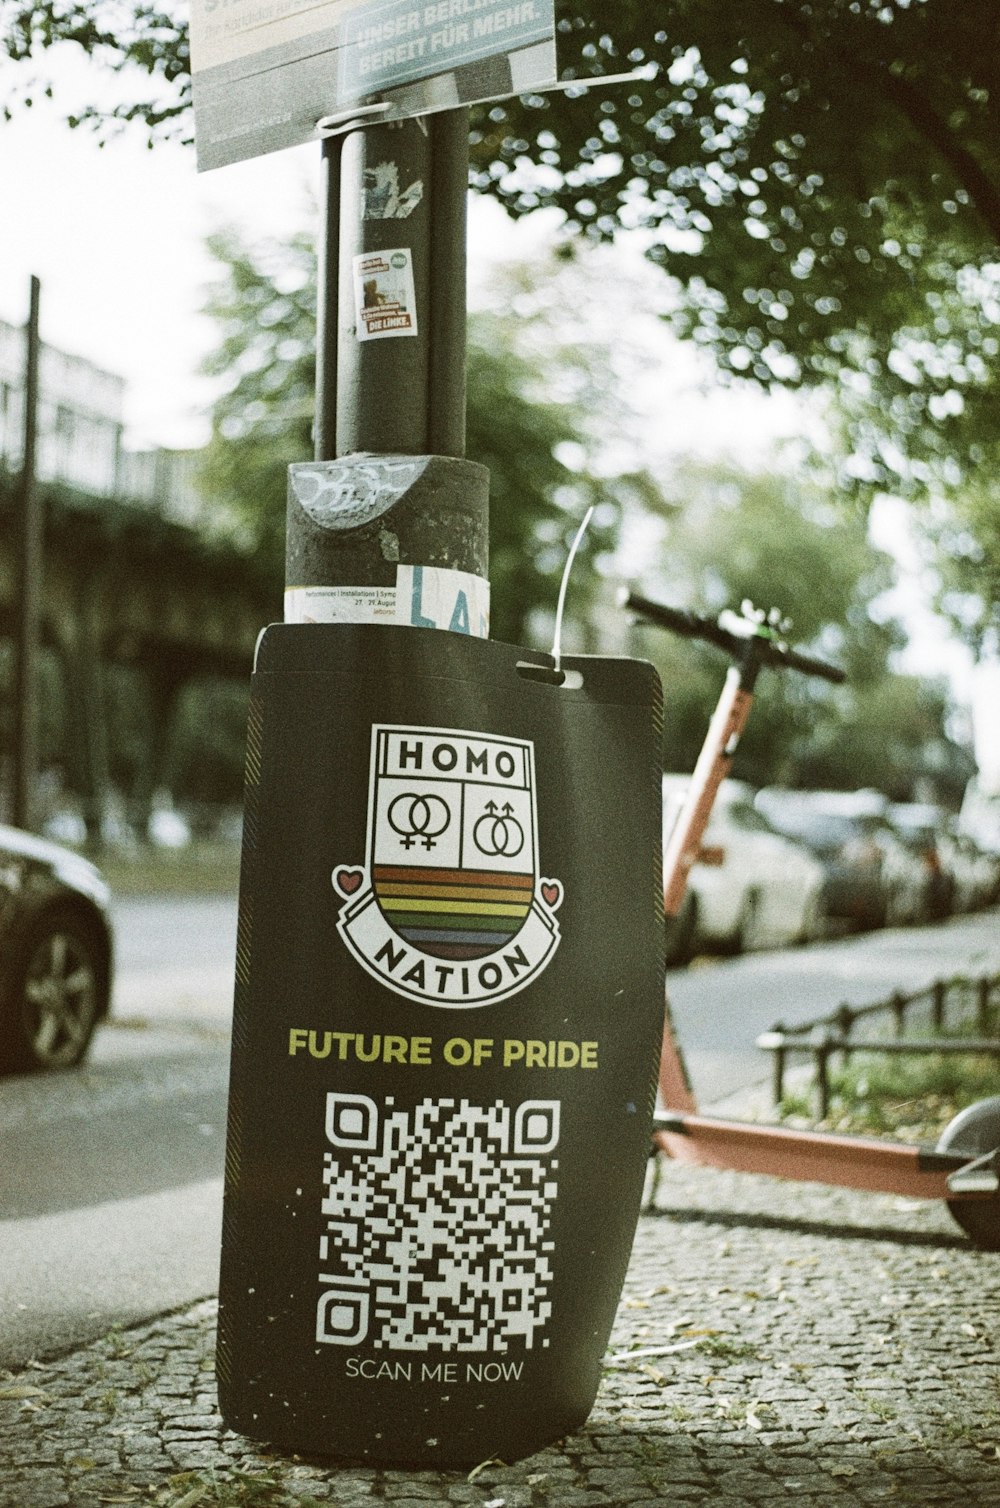 a parking meter on the side of a street